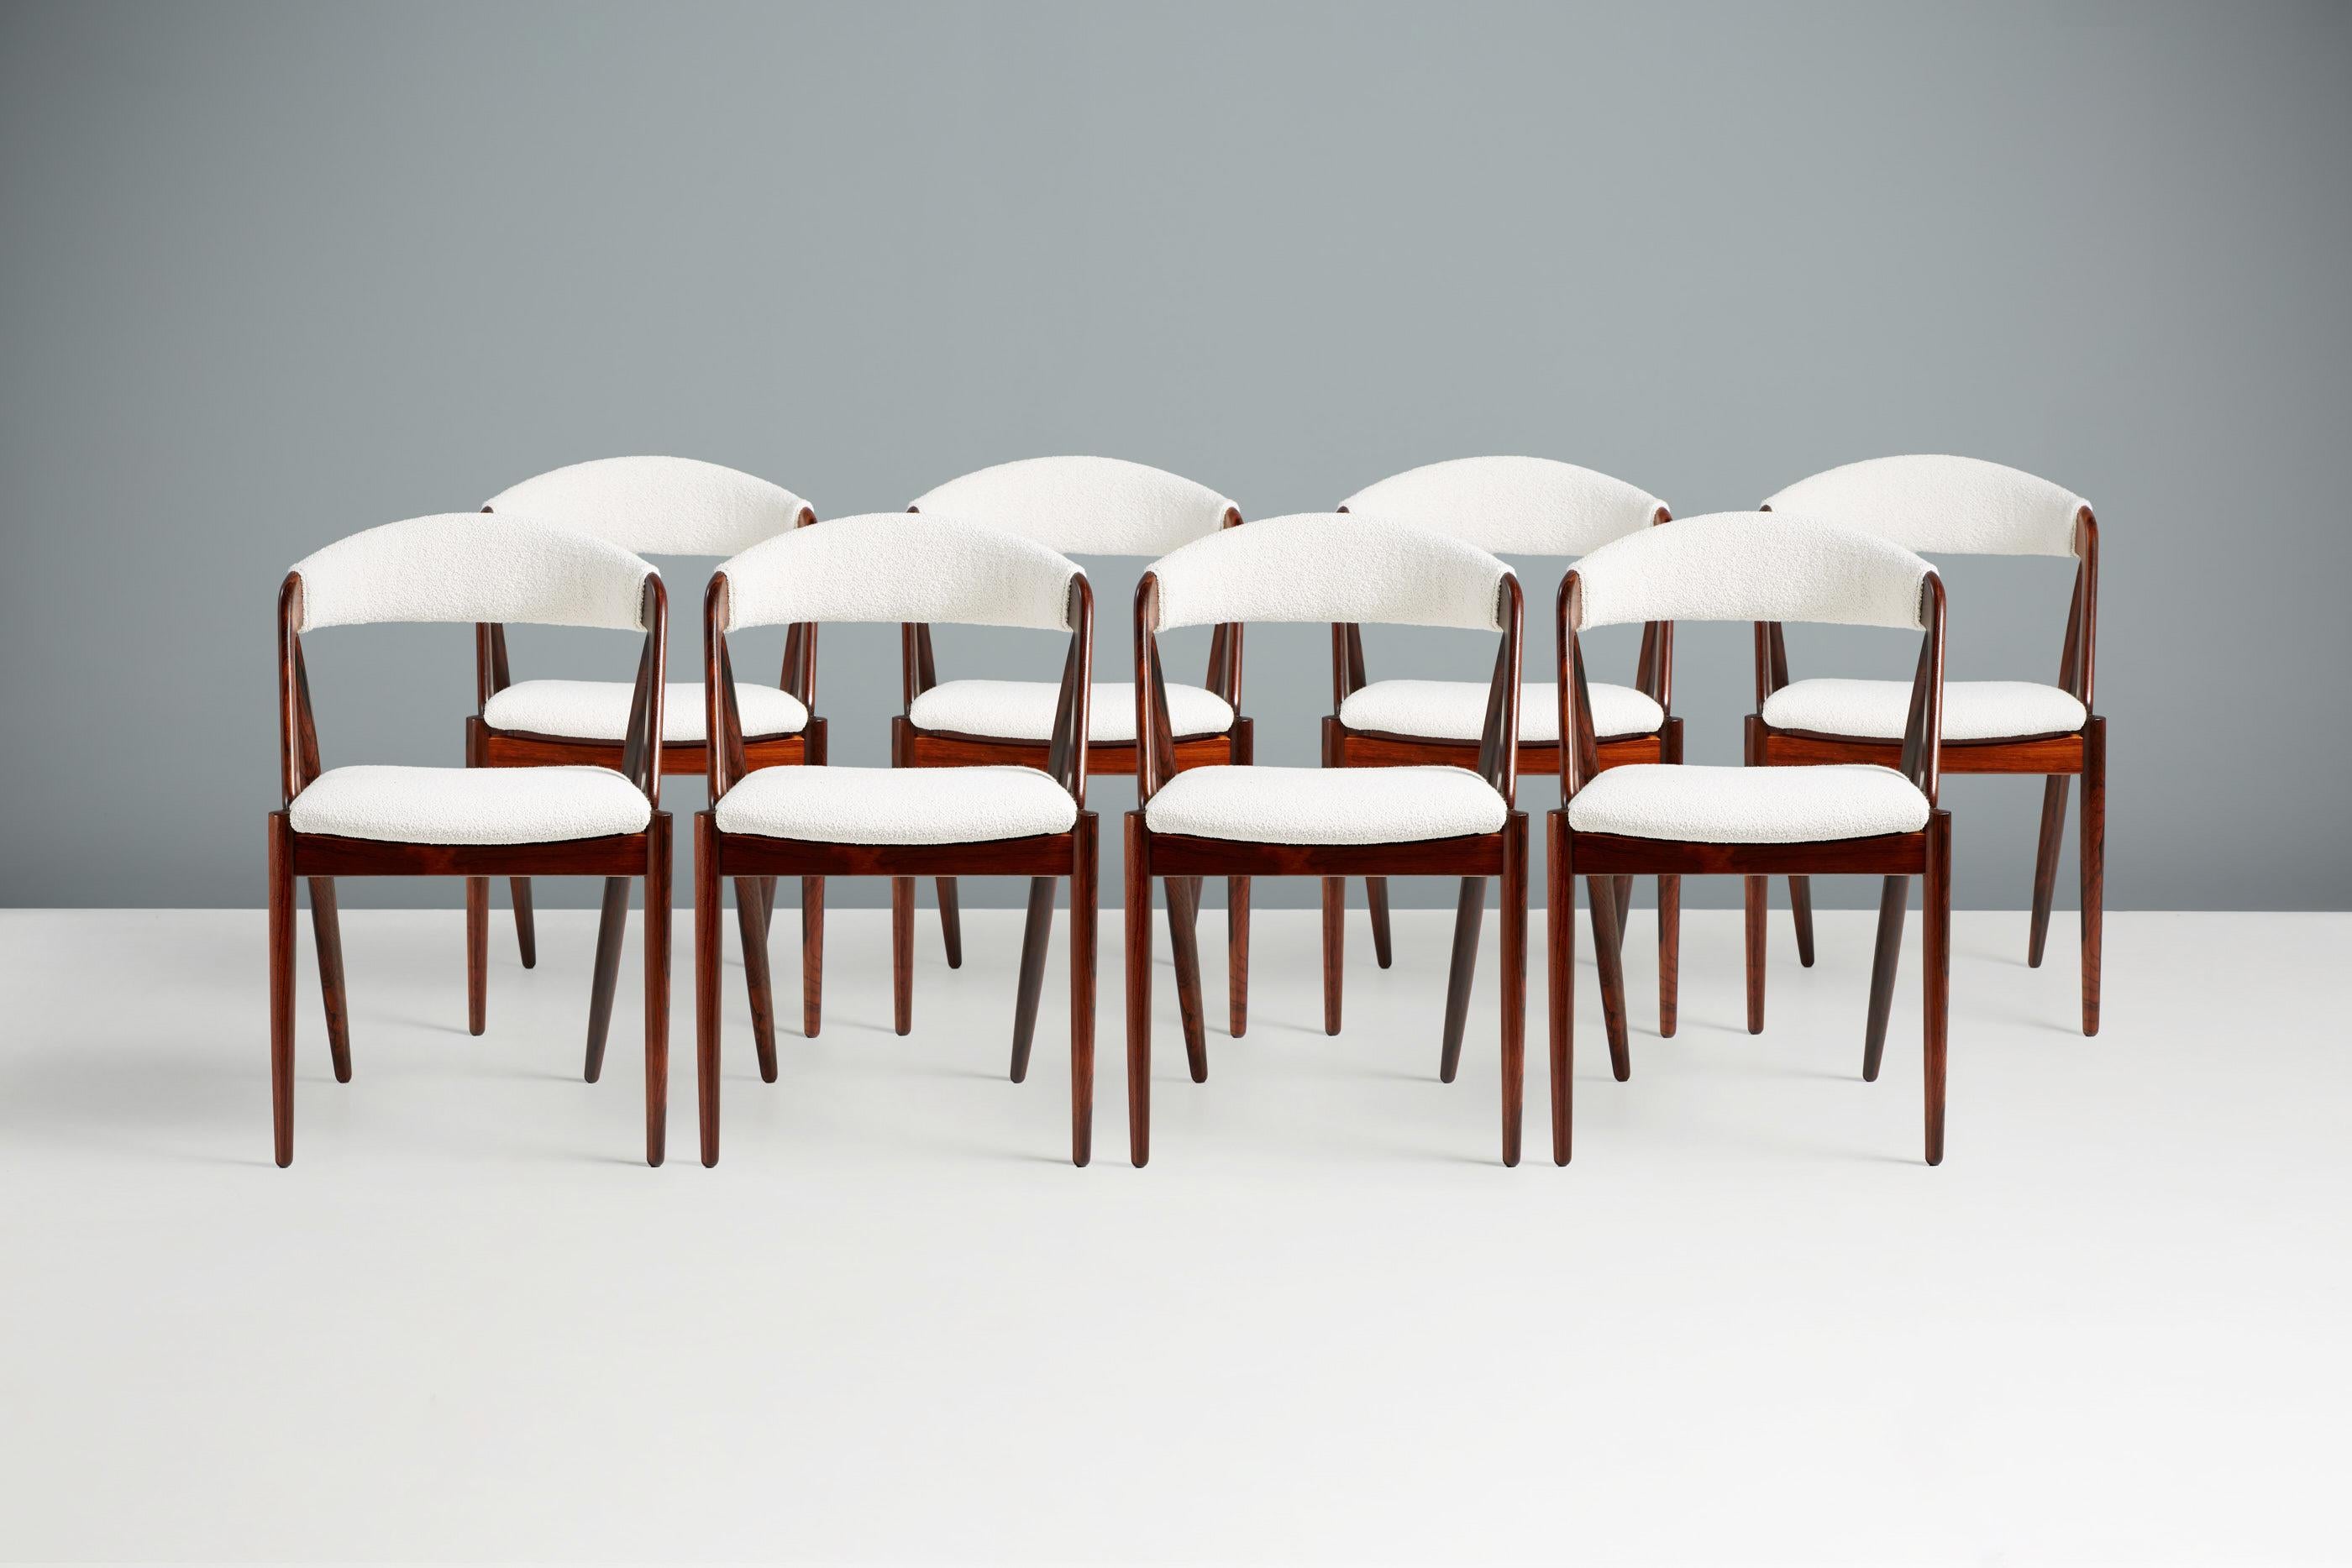 Kai Kristiansen - Model 31 Dining Chairs

Dining chairs produced by Skovman Andersen Mobelfabrik in the early 1960s. The gorgeous rosewood frames have been refinished in Danish oil with the seat and back reupholstered in premium, cotton-wool blend